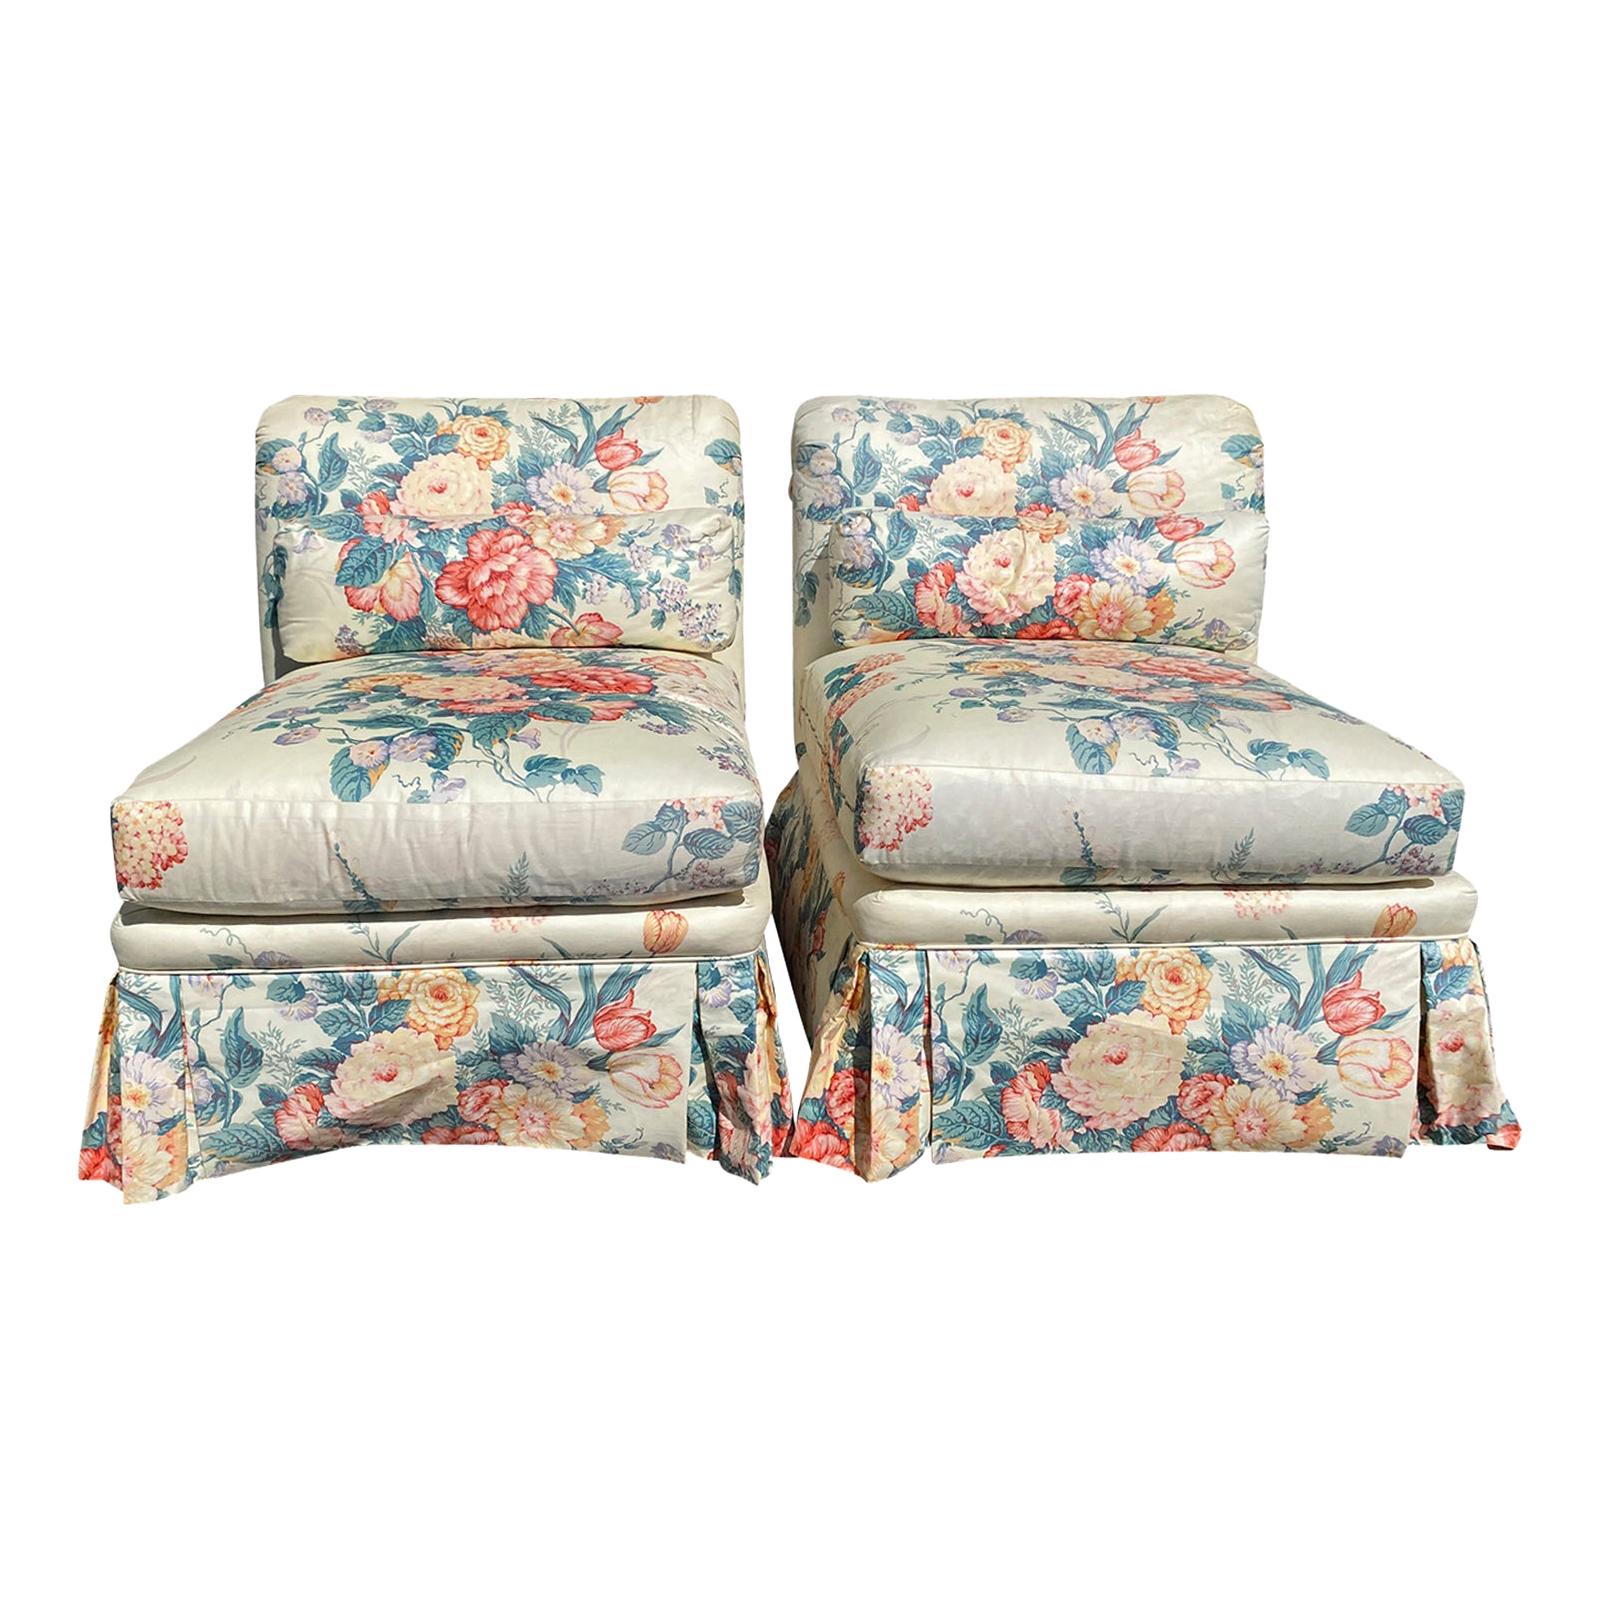 Pair of 20th Century American Slipper Chairs Upholstered by Mario Buatta